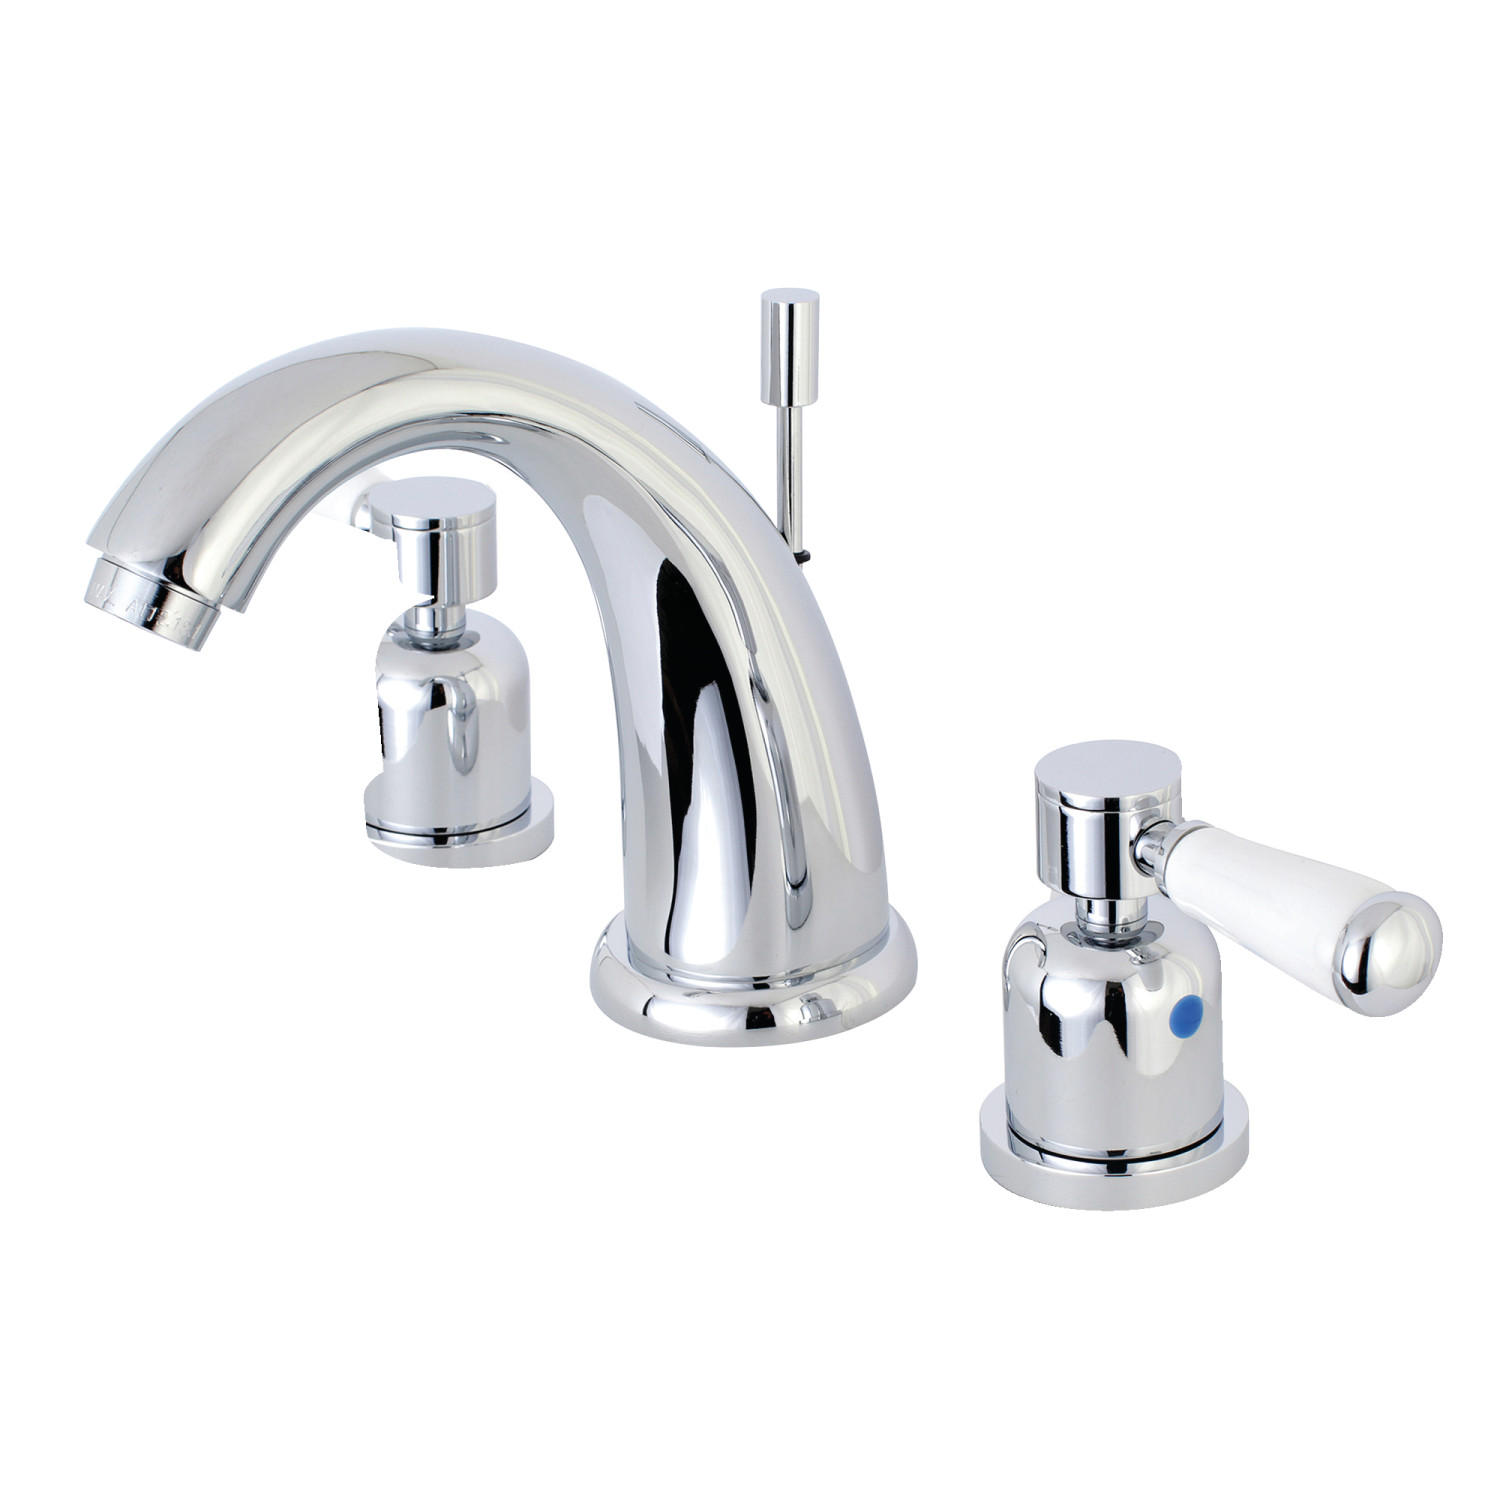 Modern 2-Handle 3-Hole Deck Mounted Widespread Bathroom Faucet with Plastic Pop-Up in Polished Chrome with 4 Finish Option